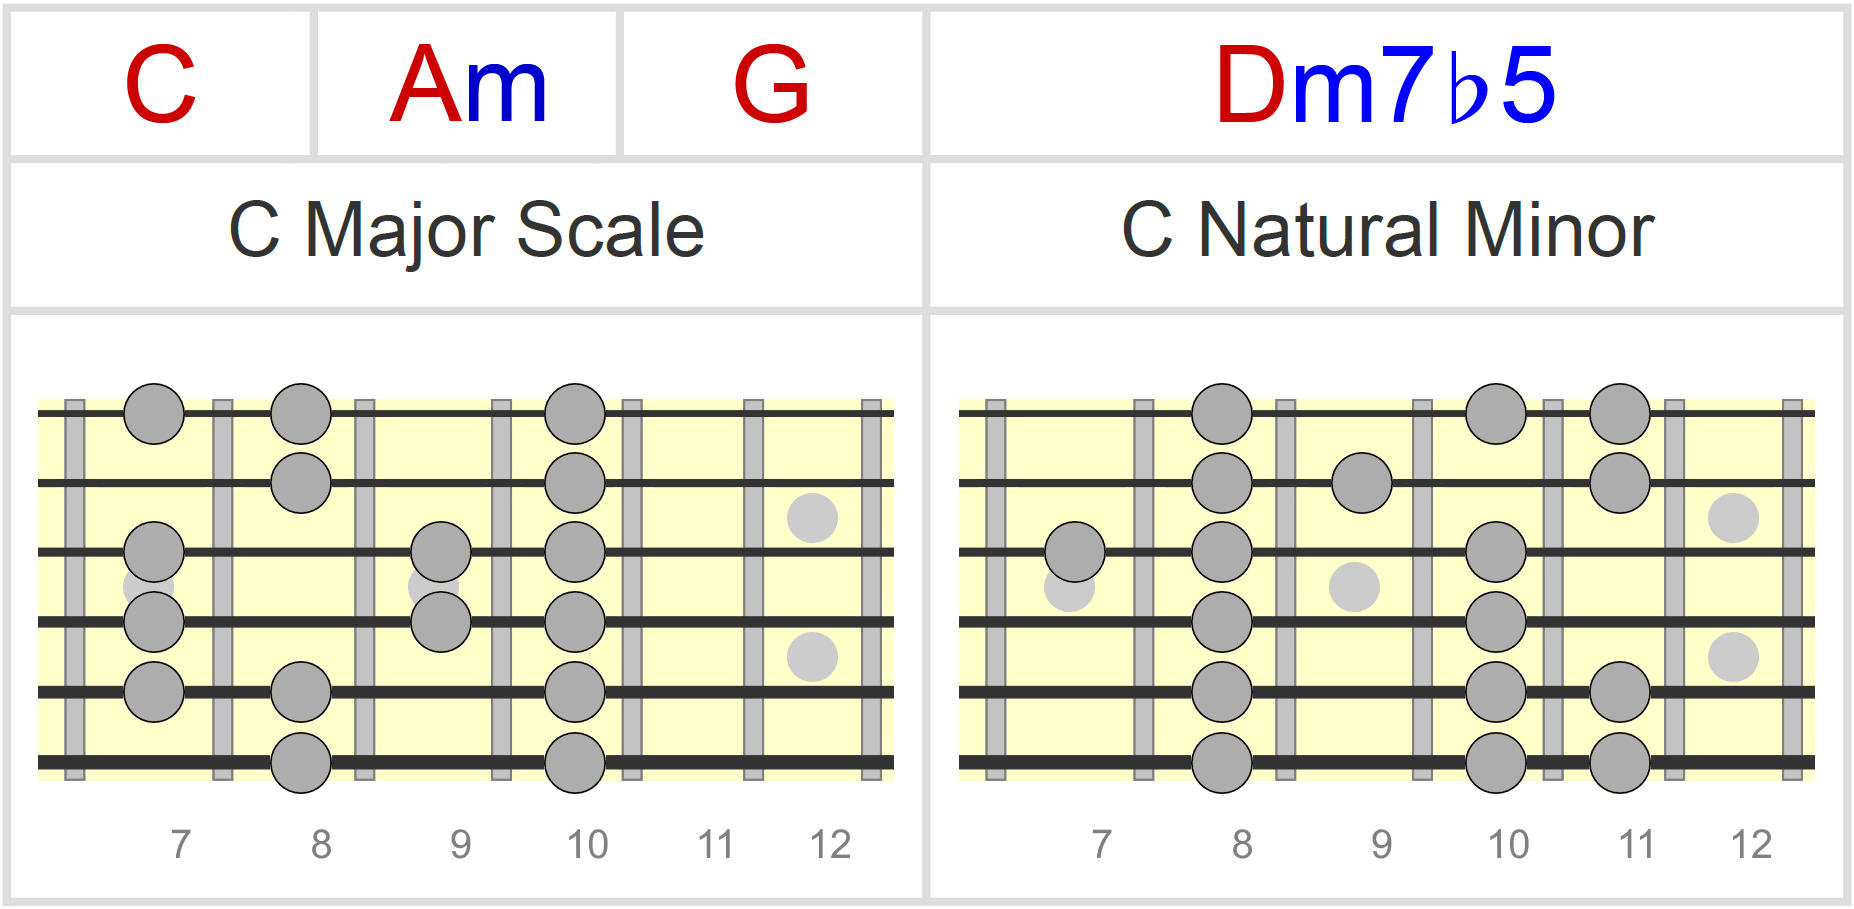 C Minor Chord Borrowed Chords How To Spot Play Over Them